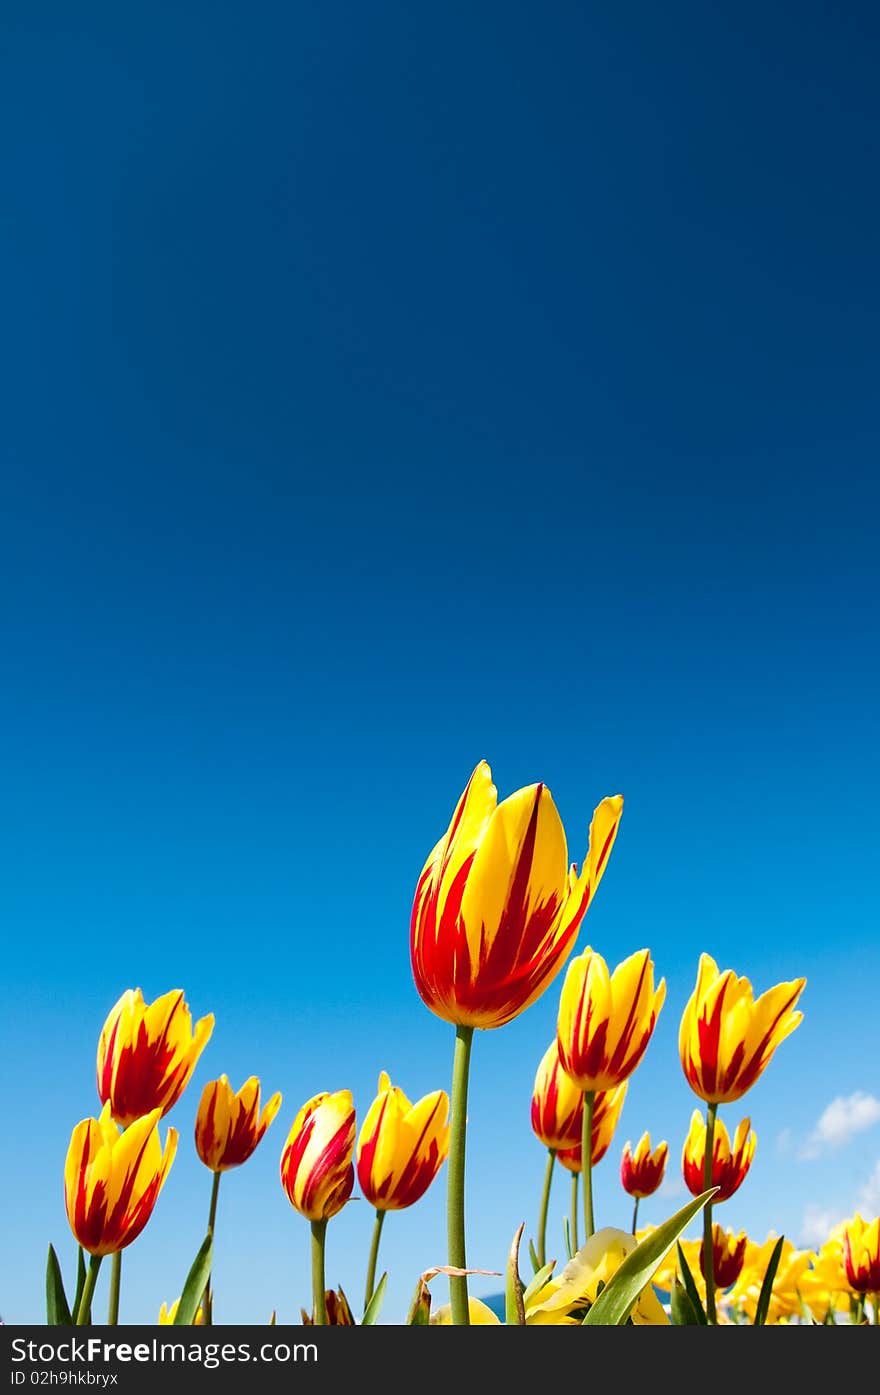 Red and Yellow flowering tulips growing in spring and surrounded by yellow and purple flowers. Photographed against a bright blue summer sky. Red and Yellow flowering tulips growing in spring and surrounded by yellow and purple flowers. Photographed against a bright blue summer sky.